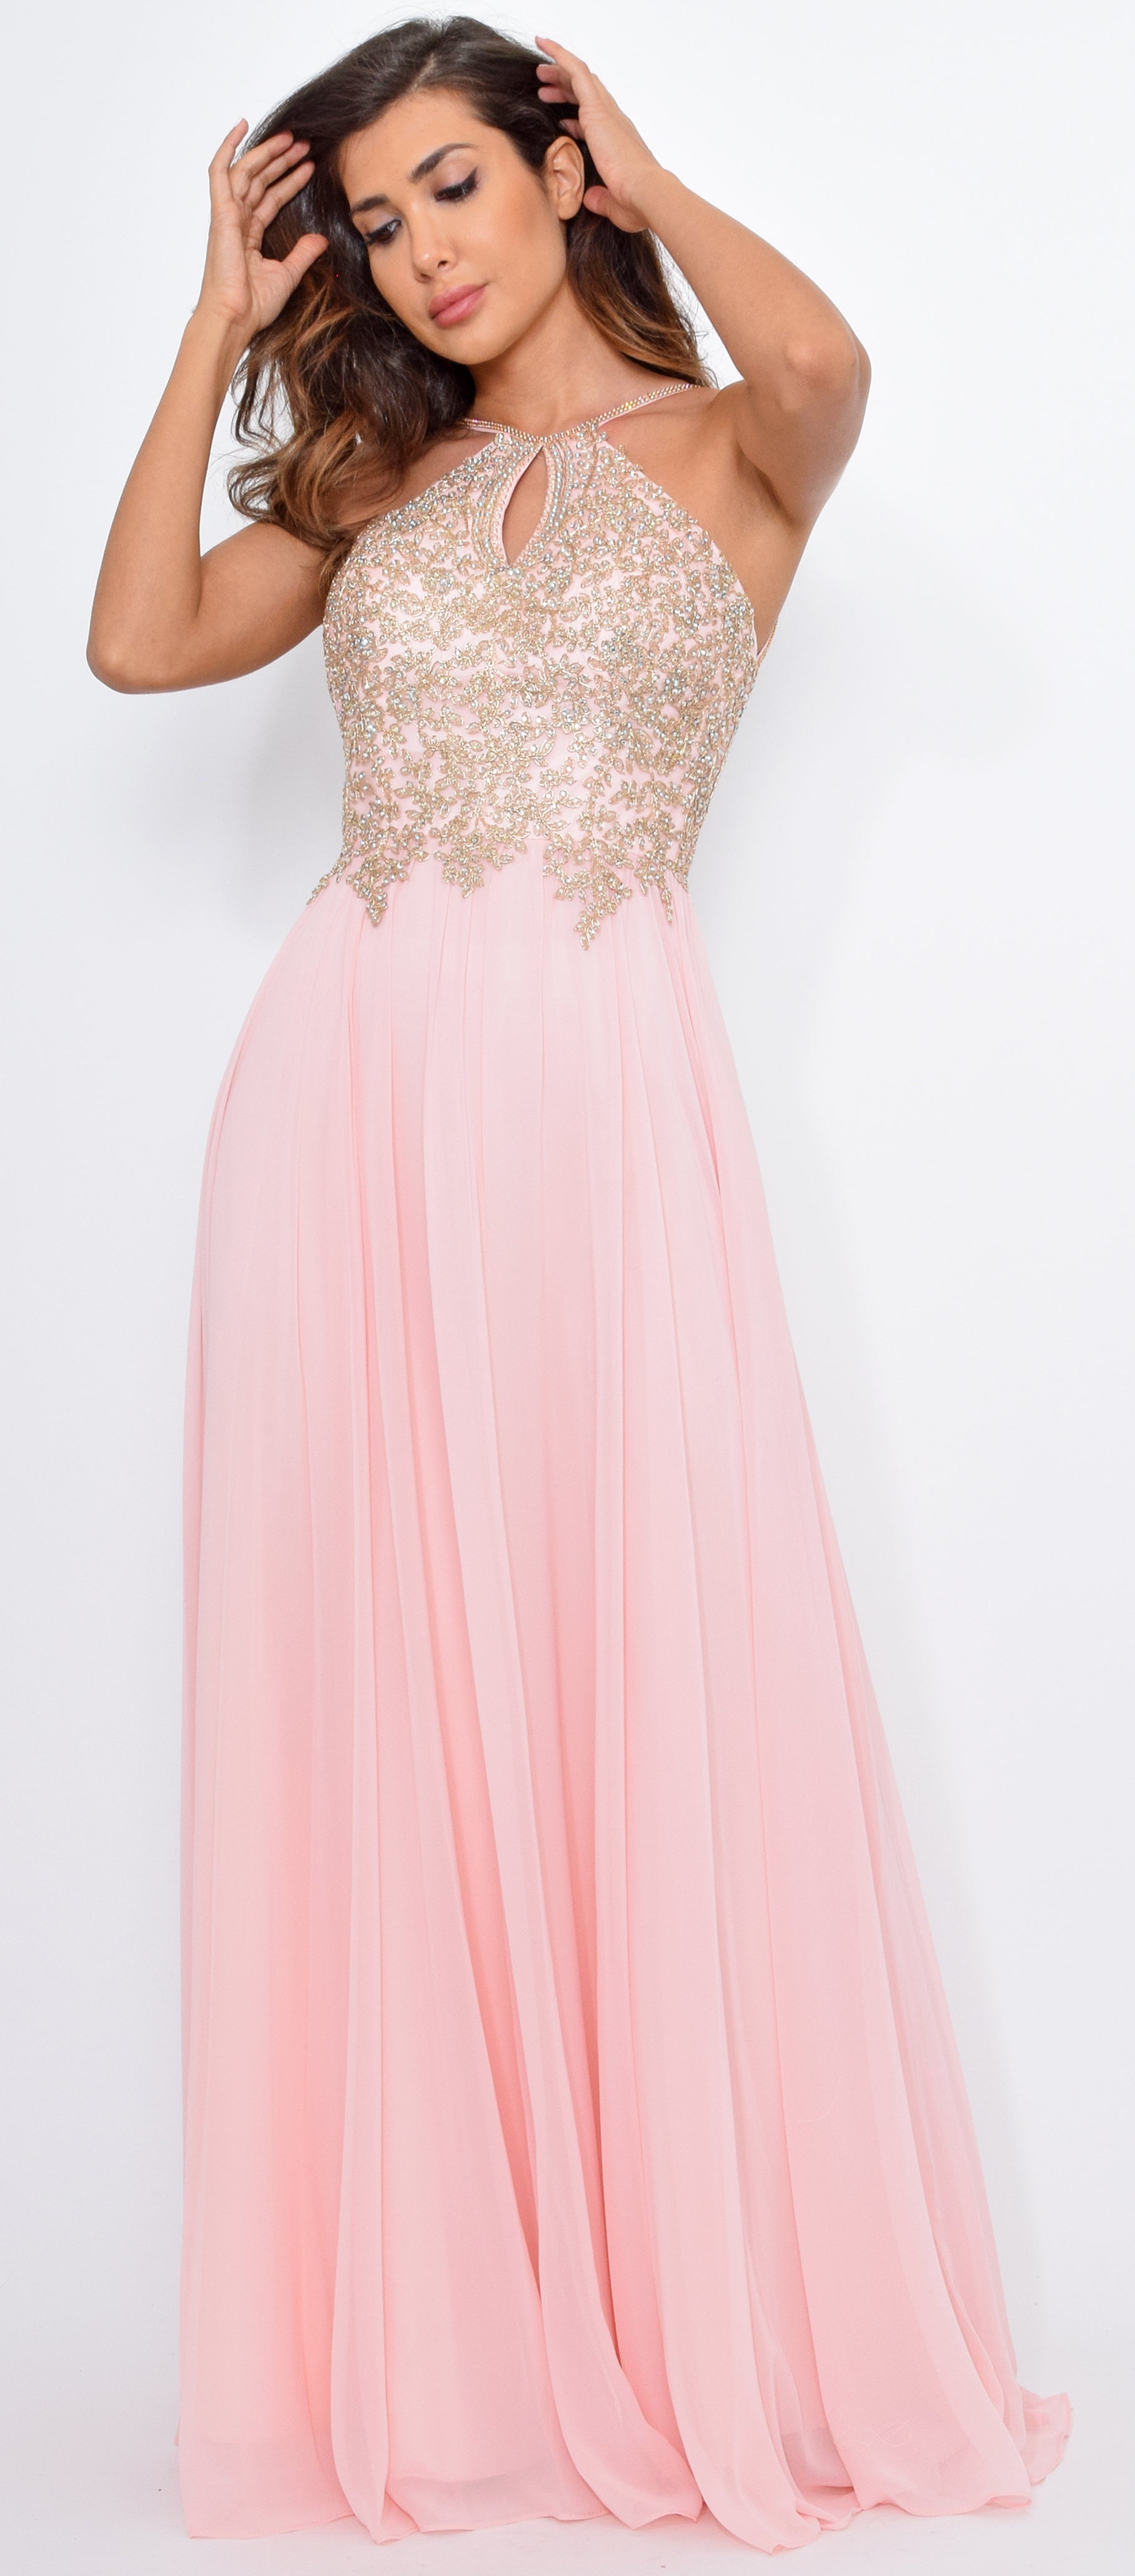 Cariana Blush Pink Gold Embroidered Gown - Emprada